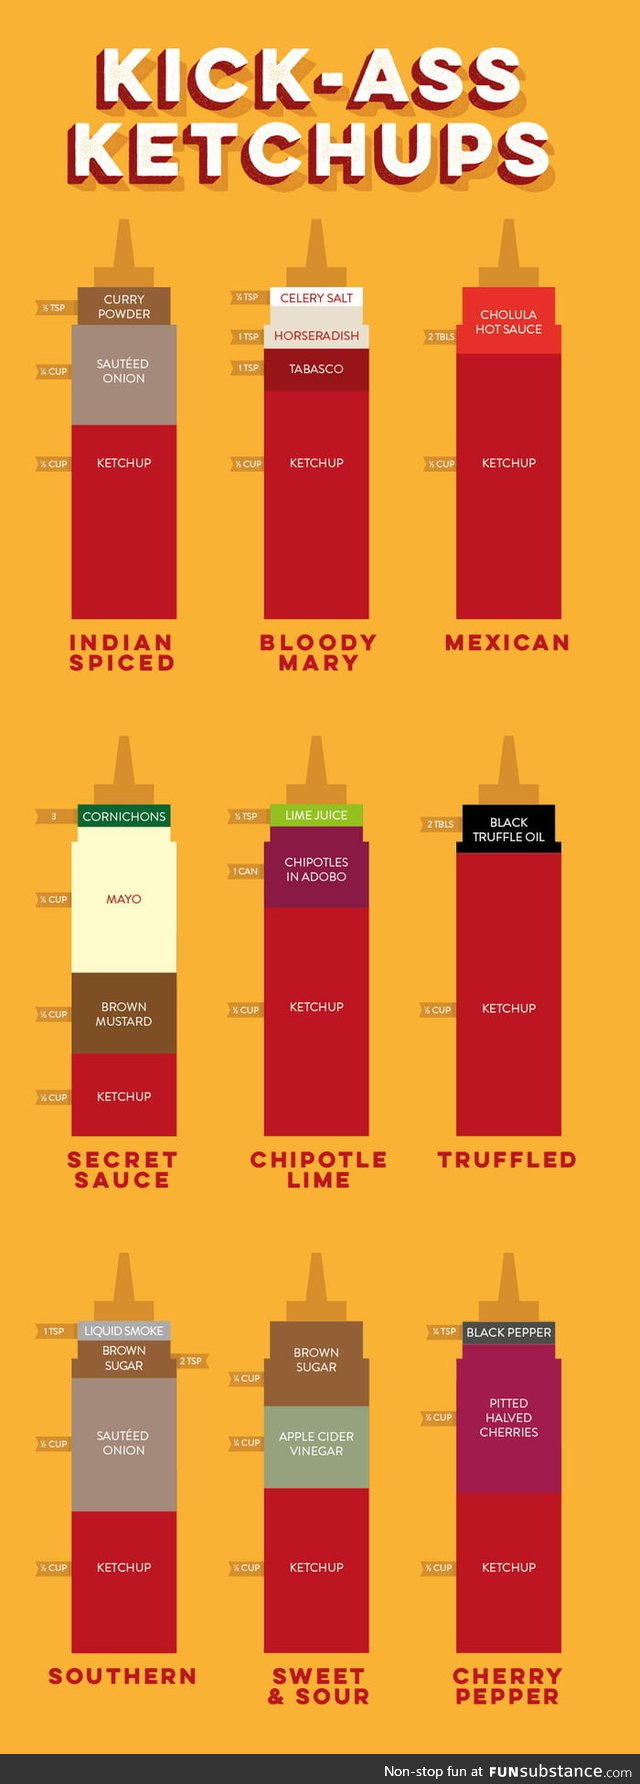 Different types of ketchup recipes, visualized